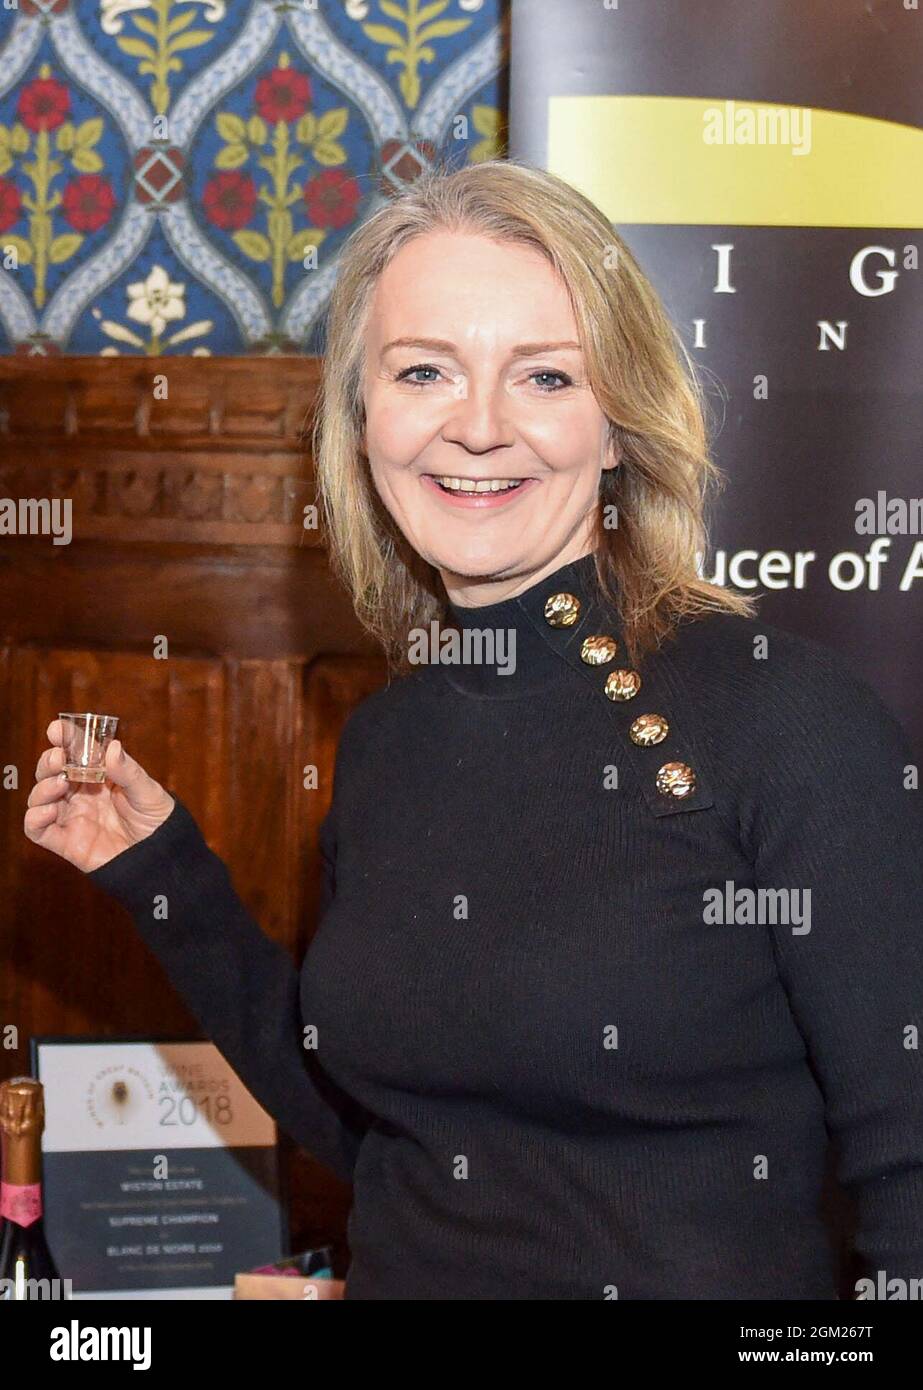 Chief Secretary to the Treasury Liz Truss at the Taste West Sussex event held in the Jubilee Room at the Houses of Parliament London . Food and drink producers from West Sussex gathered at the Houses of Parliament to show off their local produce to MPs and staff - Nov 2018 Stock Photo